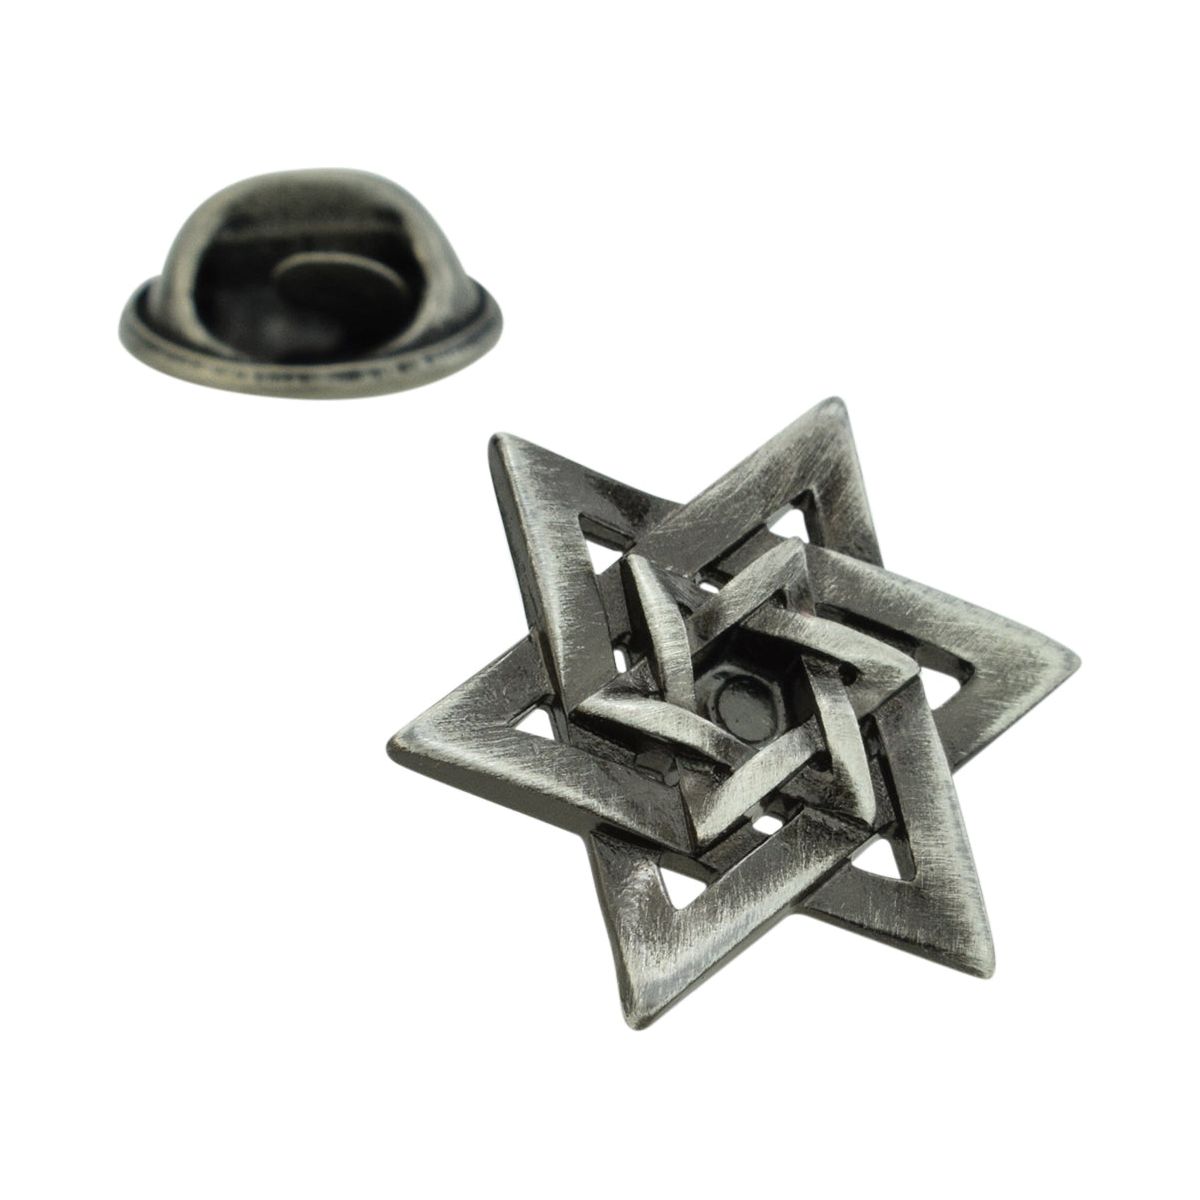 Antique Style Star of David Lapel Pin Badge - Ashton and Finch